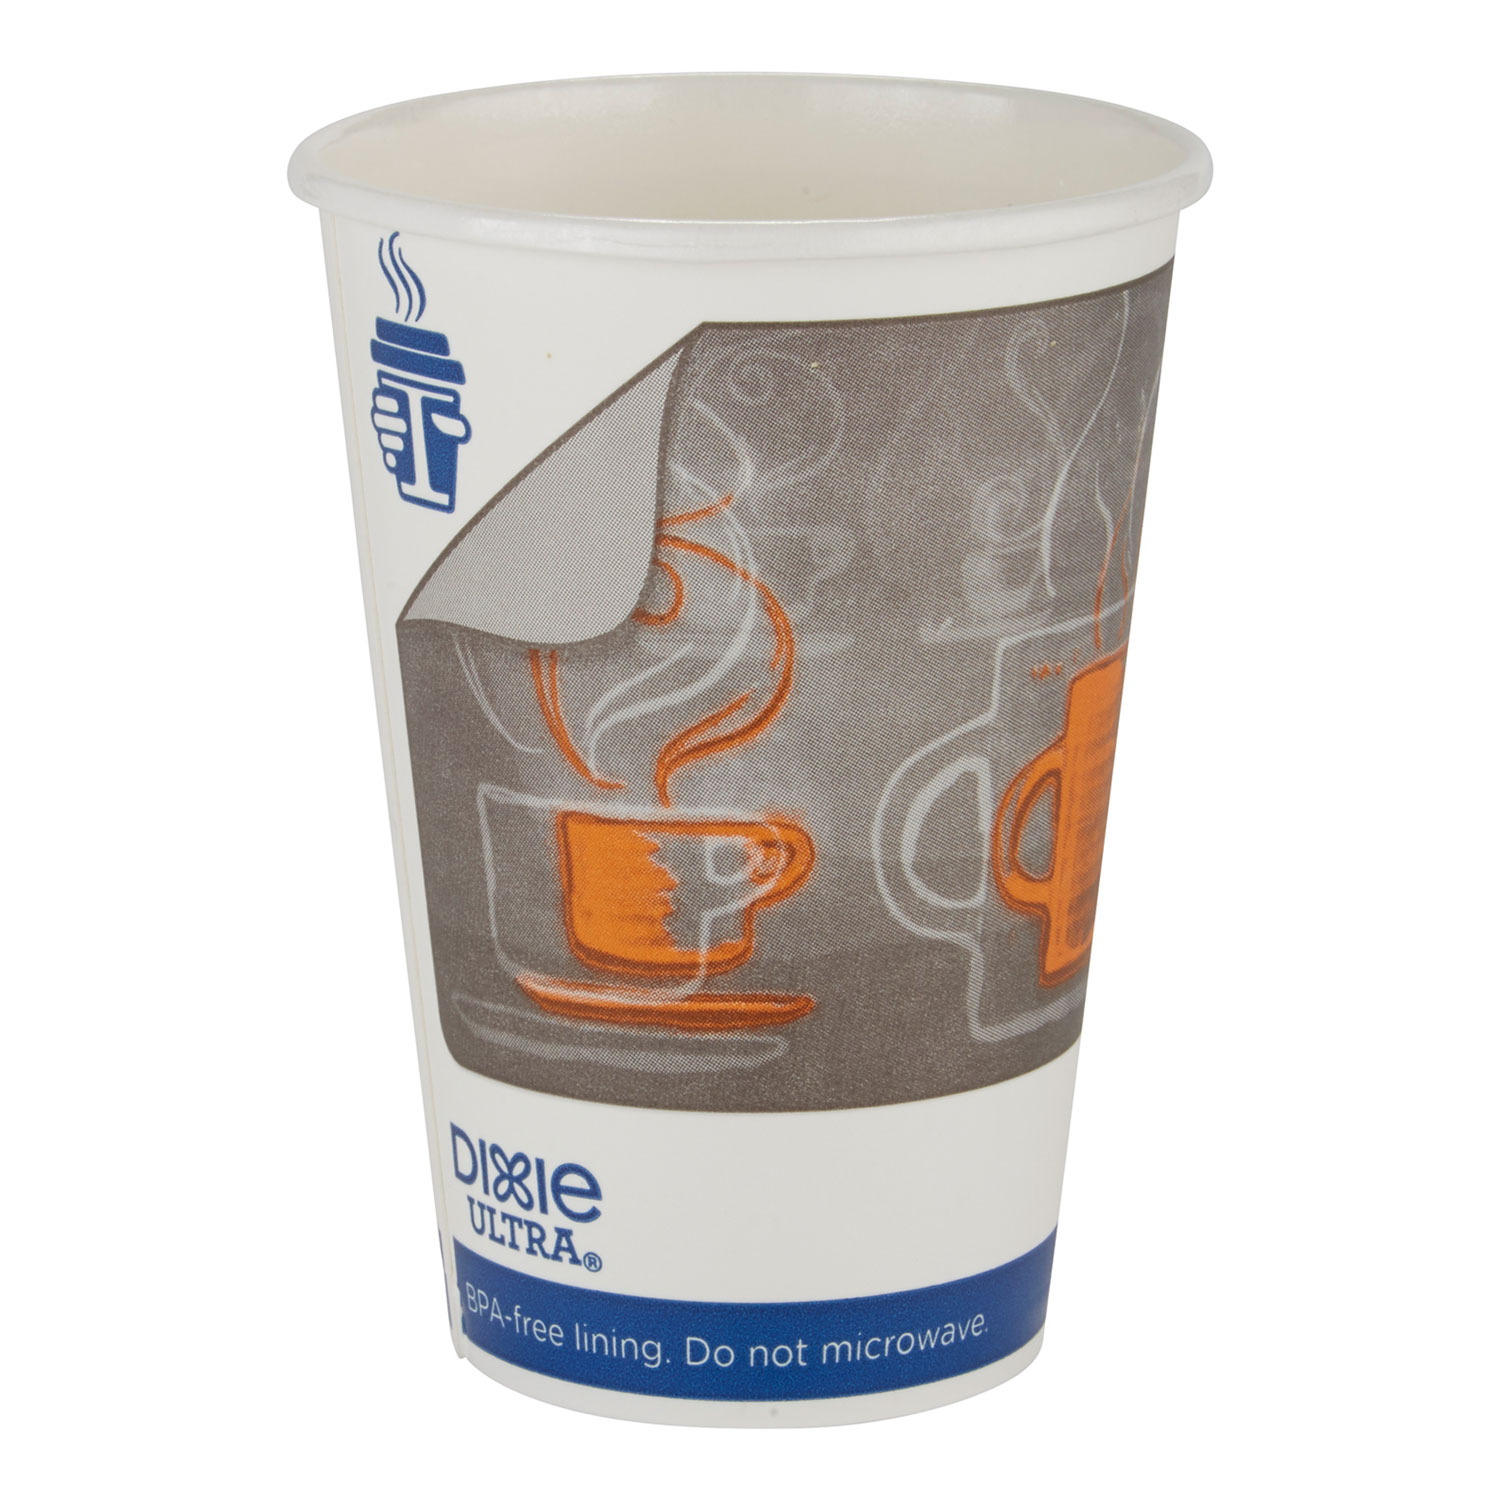  Georgia Pacific Professional 6346AR Dixie Ultra Insulair Paper Hot Cup, 16 oz, Coffee, 50 Cups/Sleeve, 20 Sleeves/CT (DXE6346AR) 